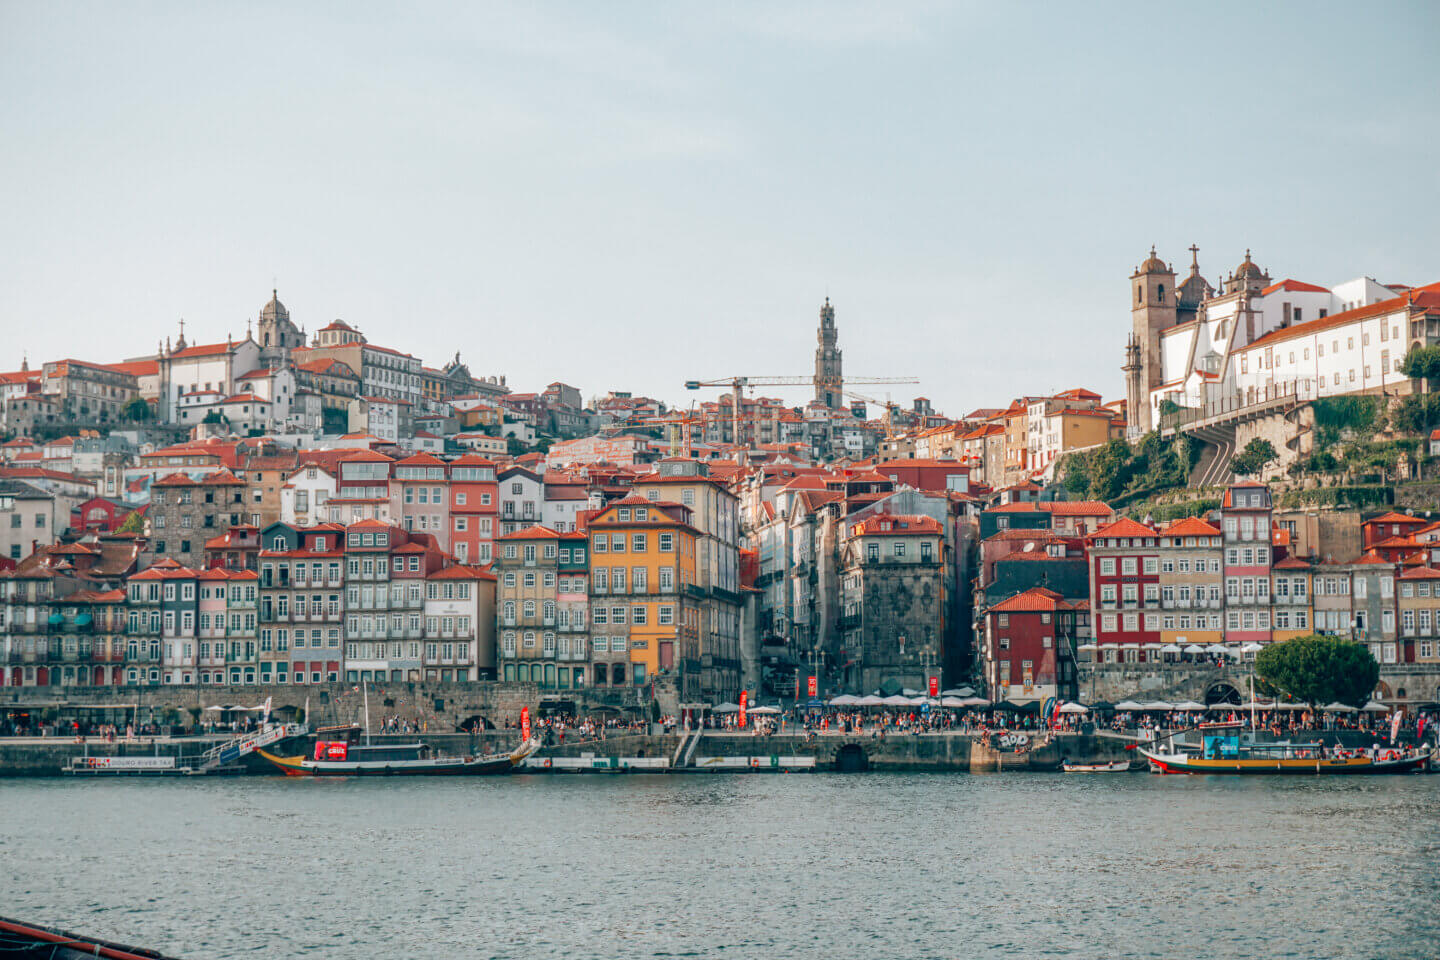 The Porto skyline in Portugal, one of the most romantic places in Europe!